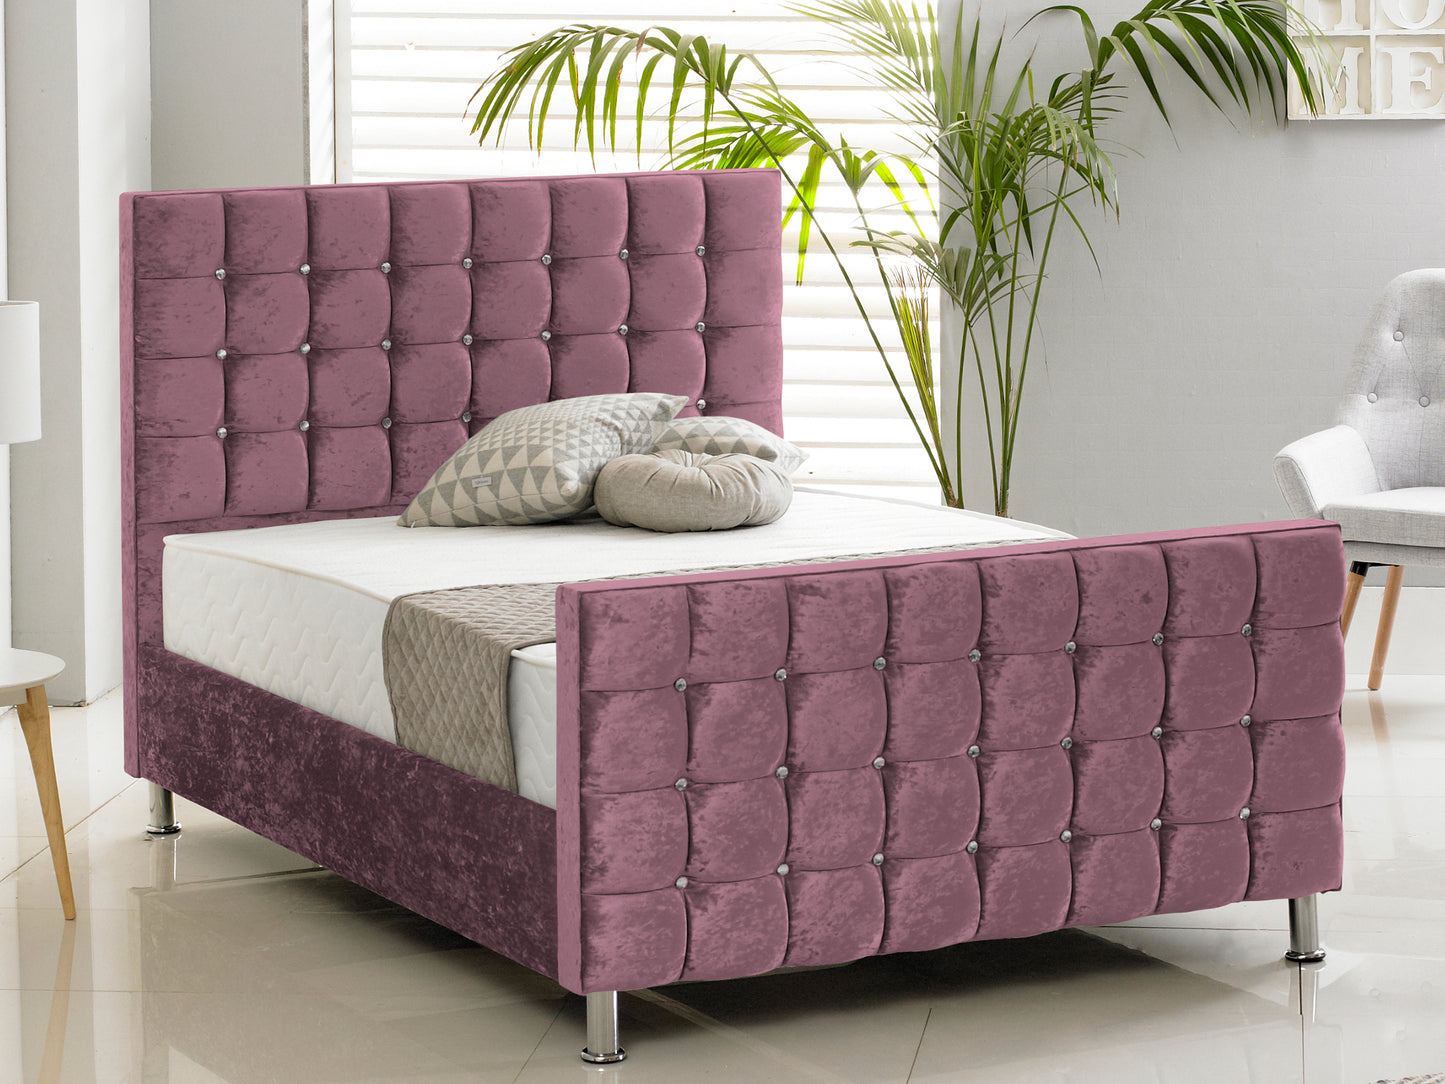 Cube Luxury Bed Frame in Crushed Aubergine